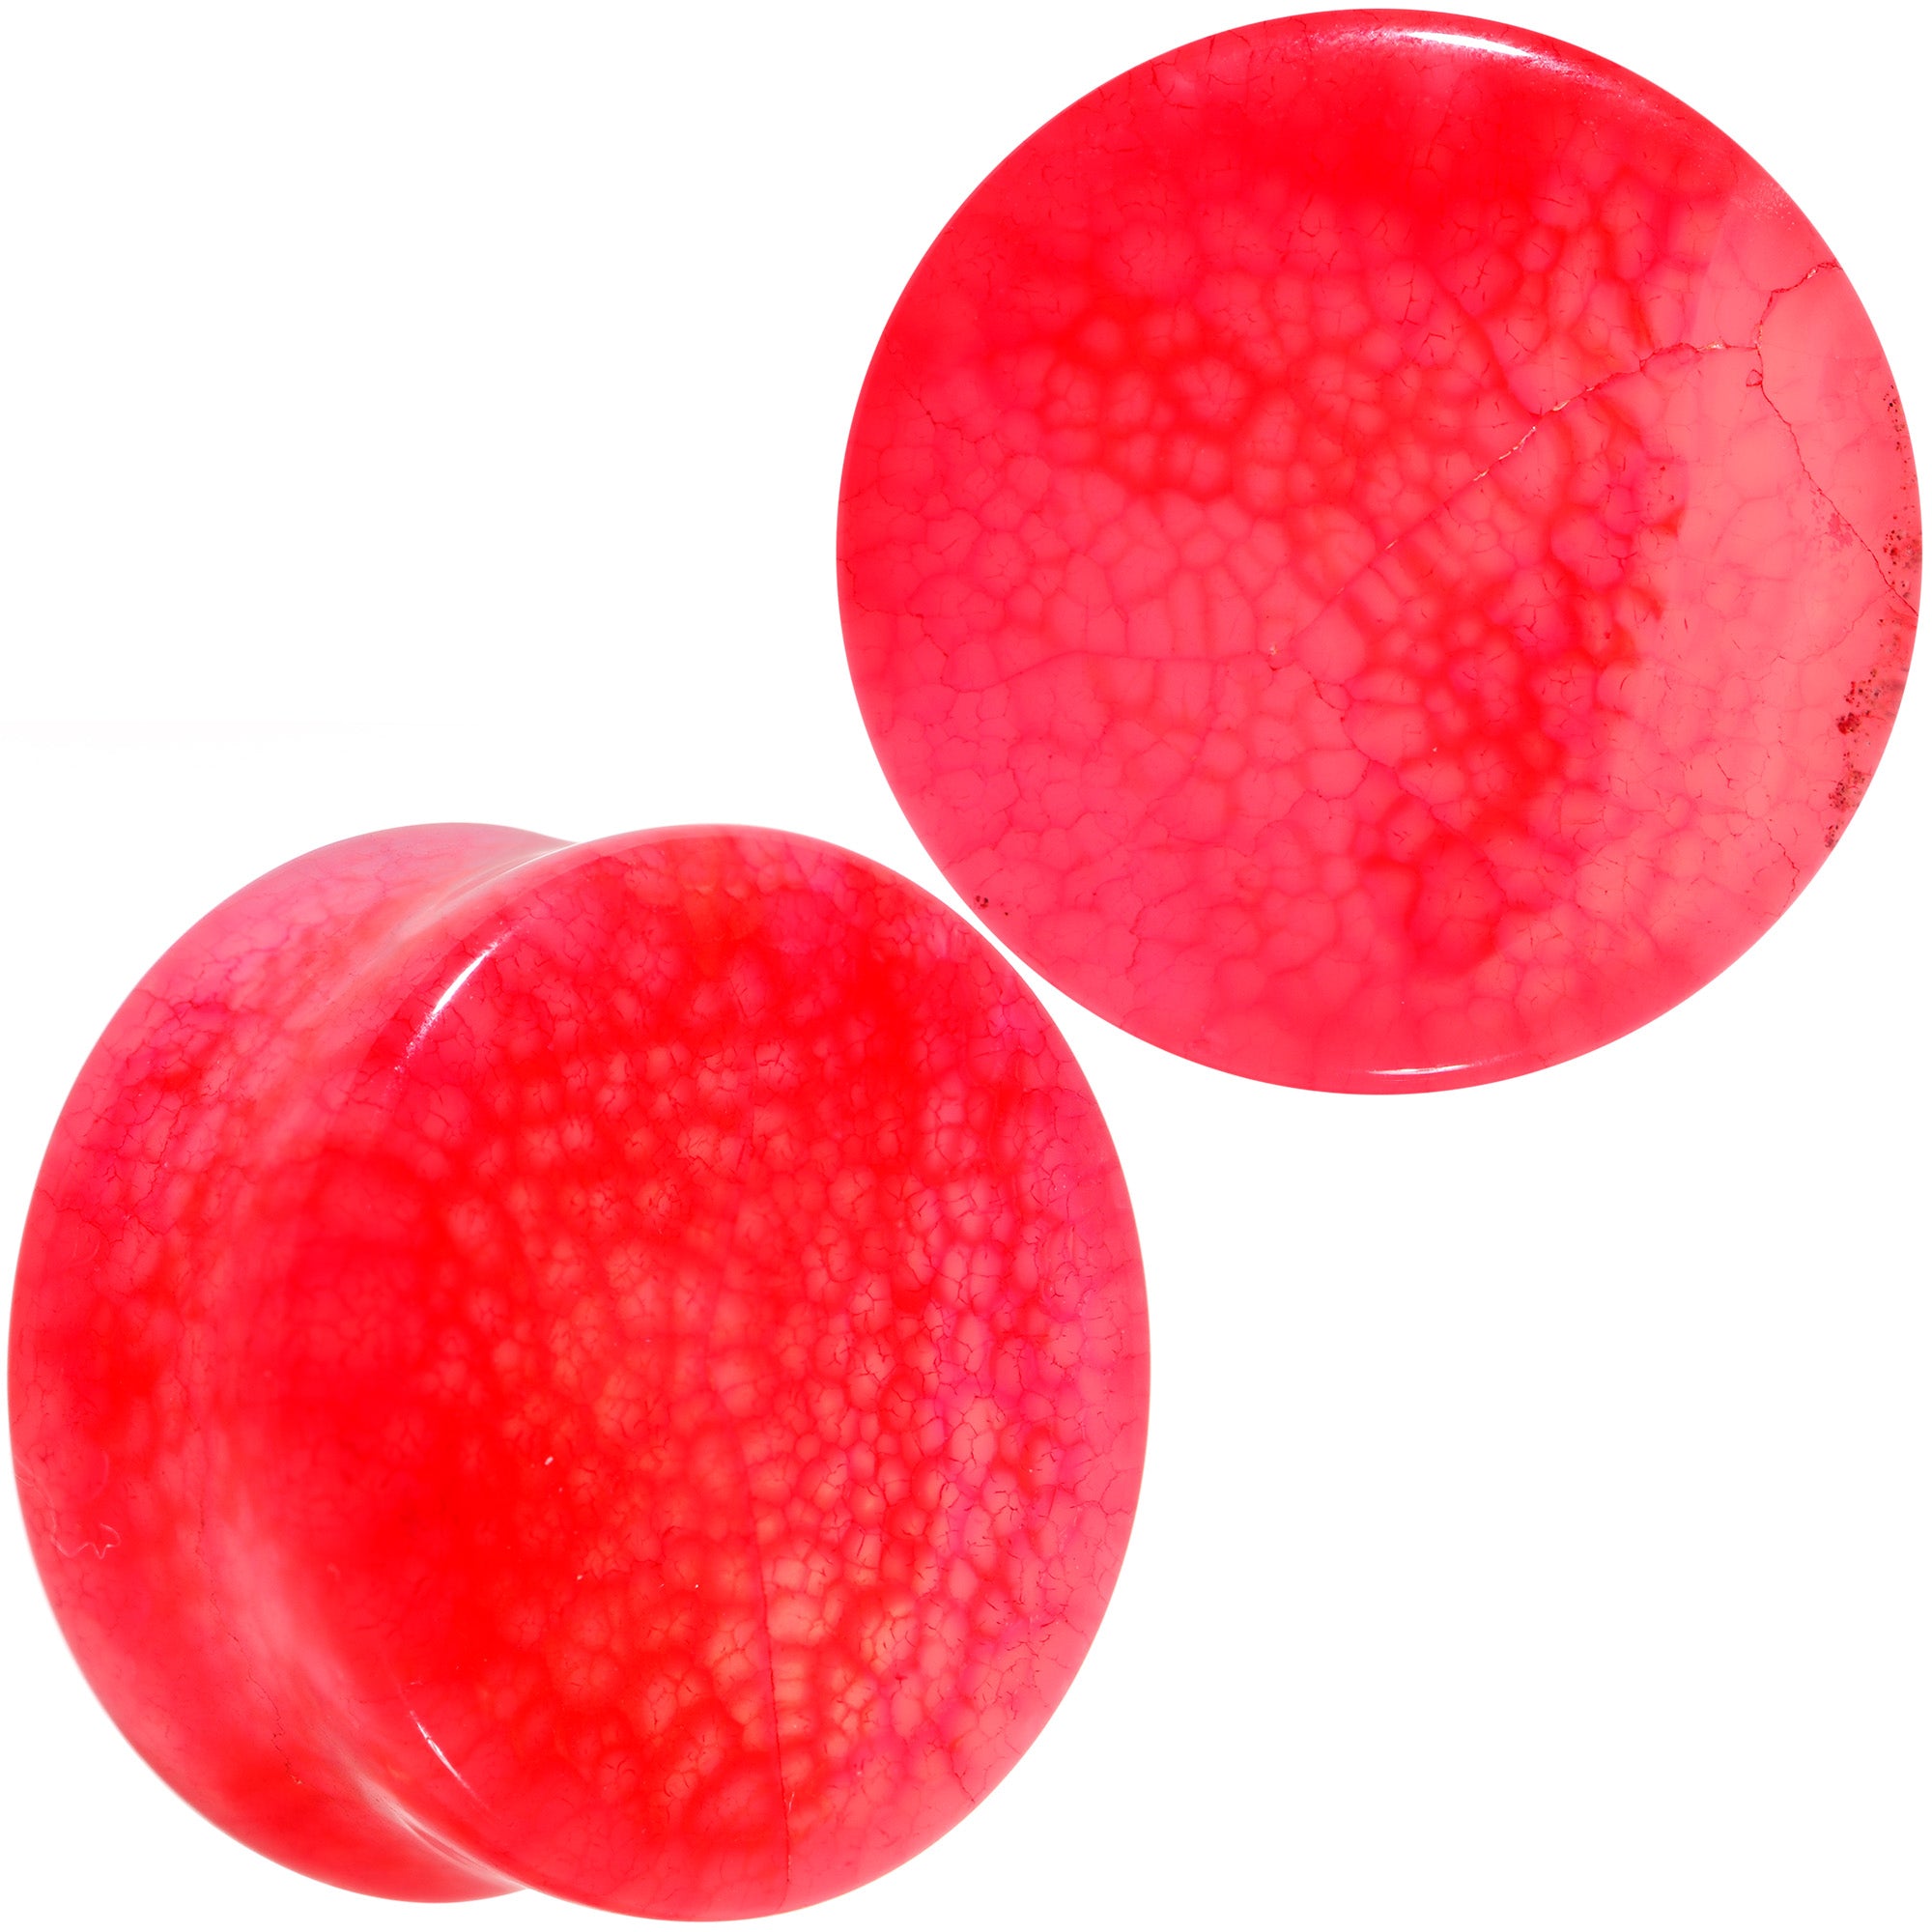 Red Agate Stone Saddle Plug Set Available in Sizes 0 Gauge to 25mm